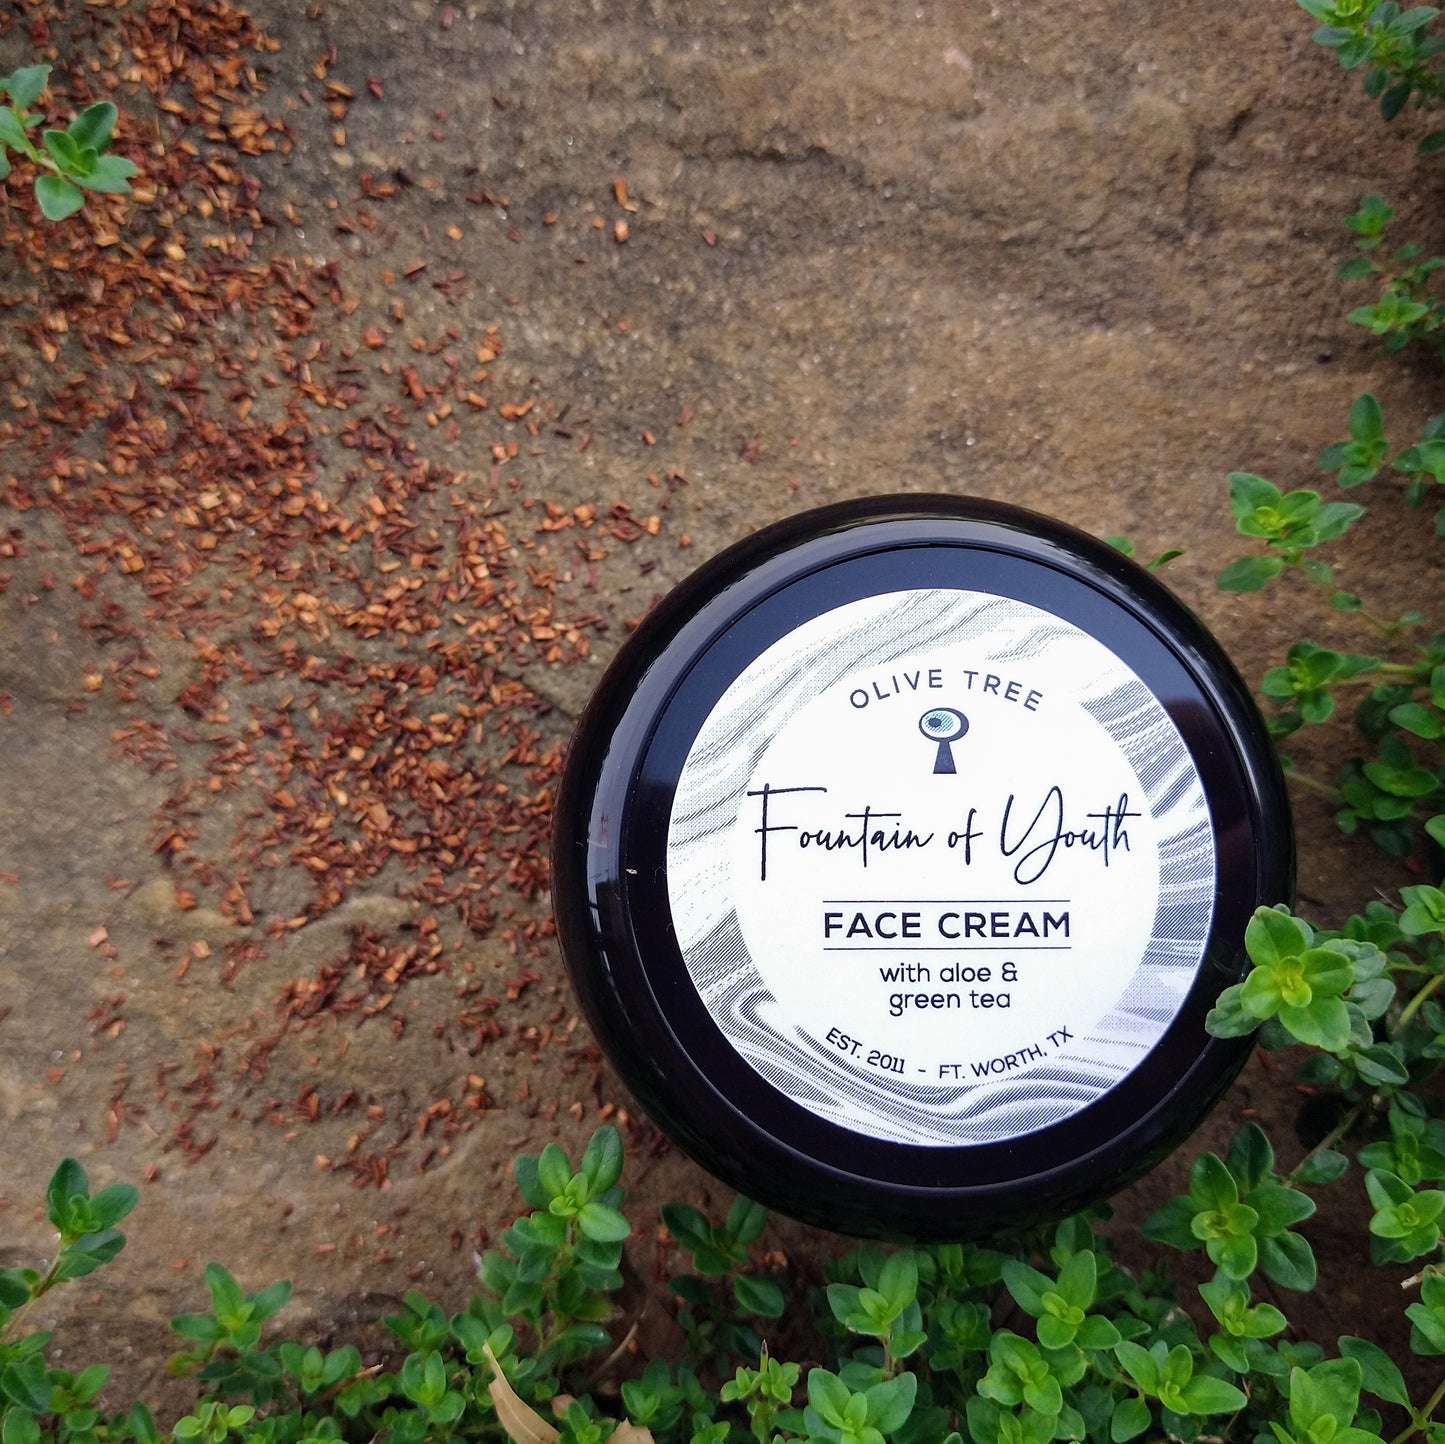 Fountain of Youth Face Cream